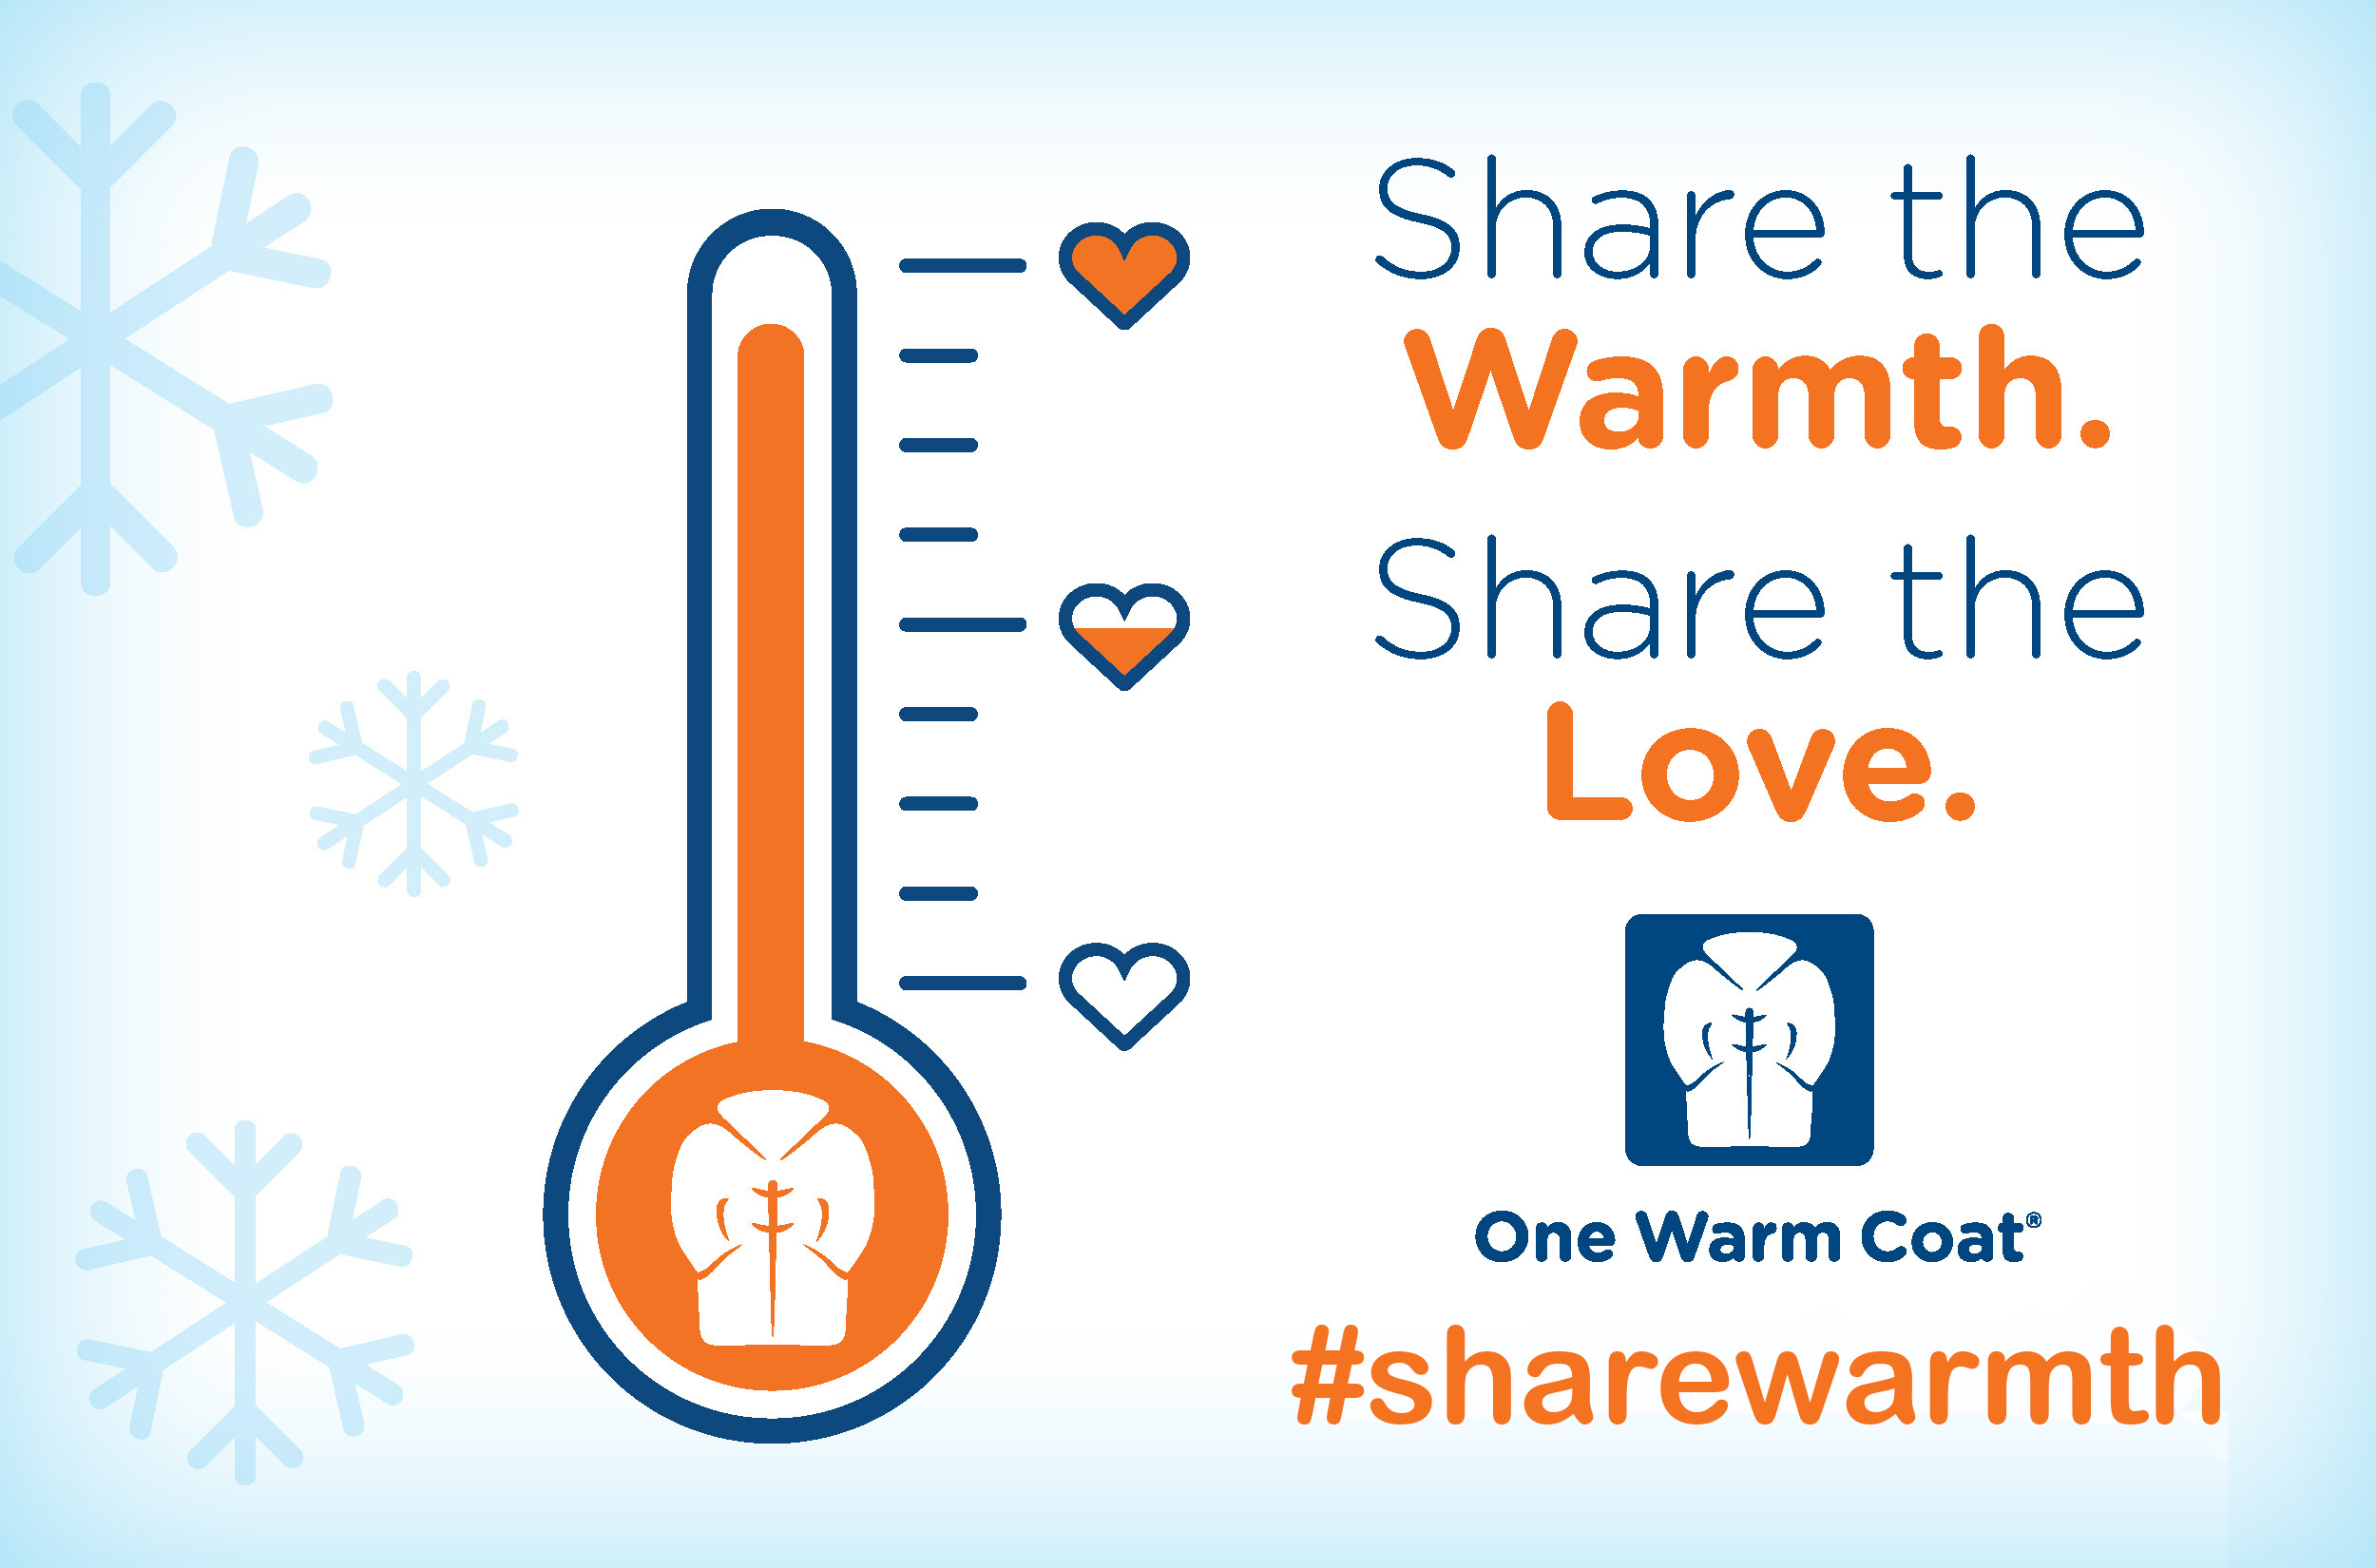 One Warm Coat (@onewarmcoat) • Instagram photos and videos